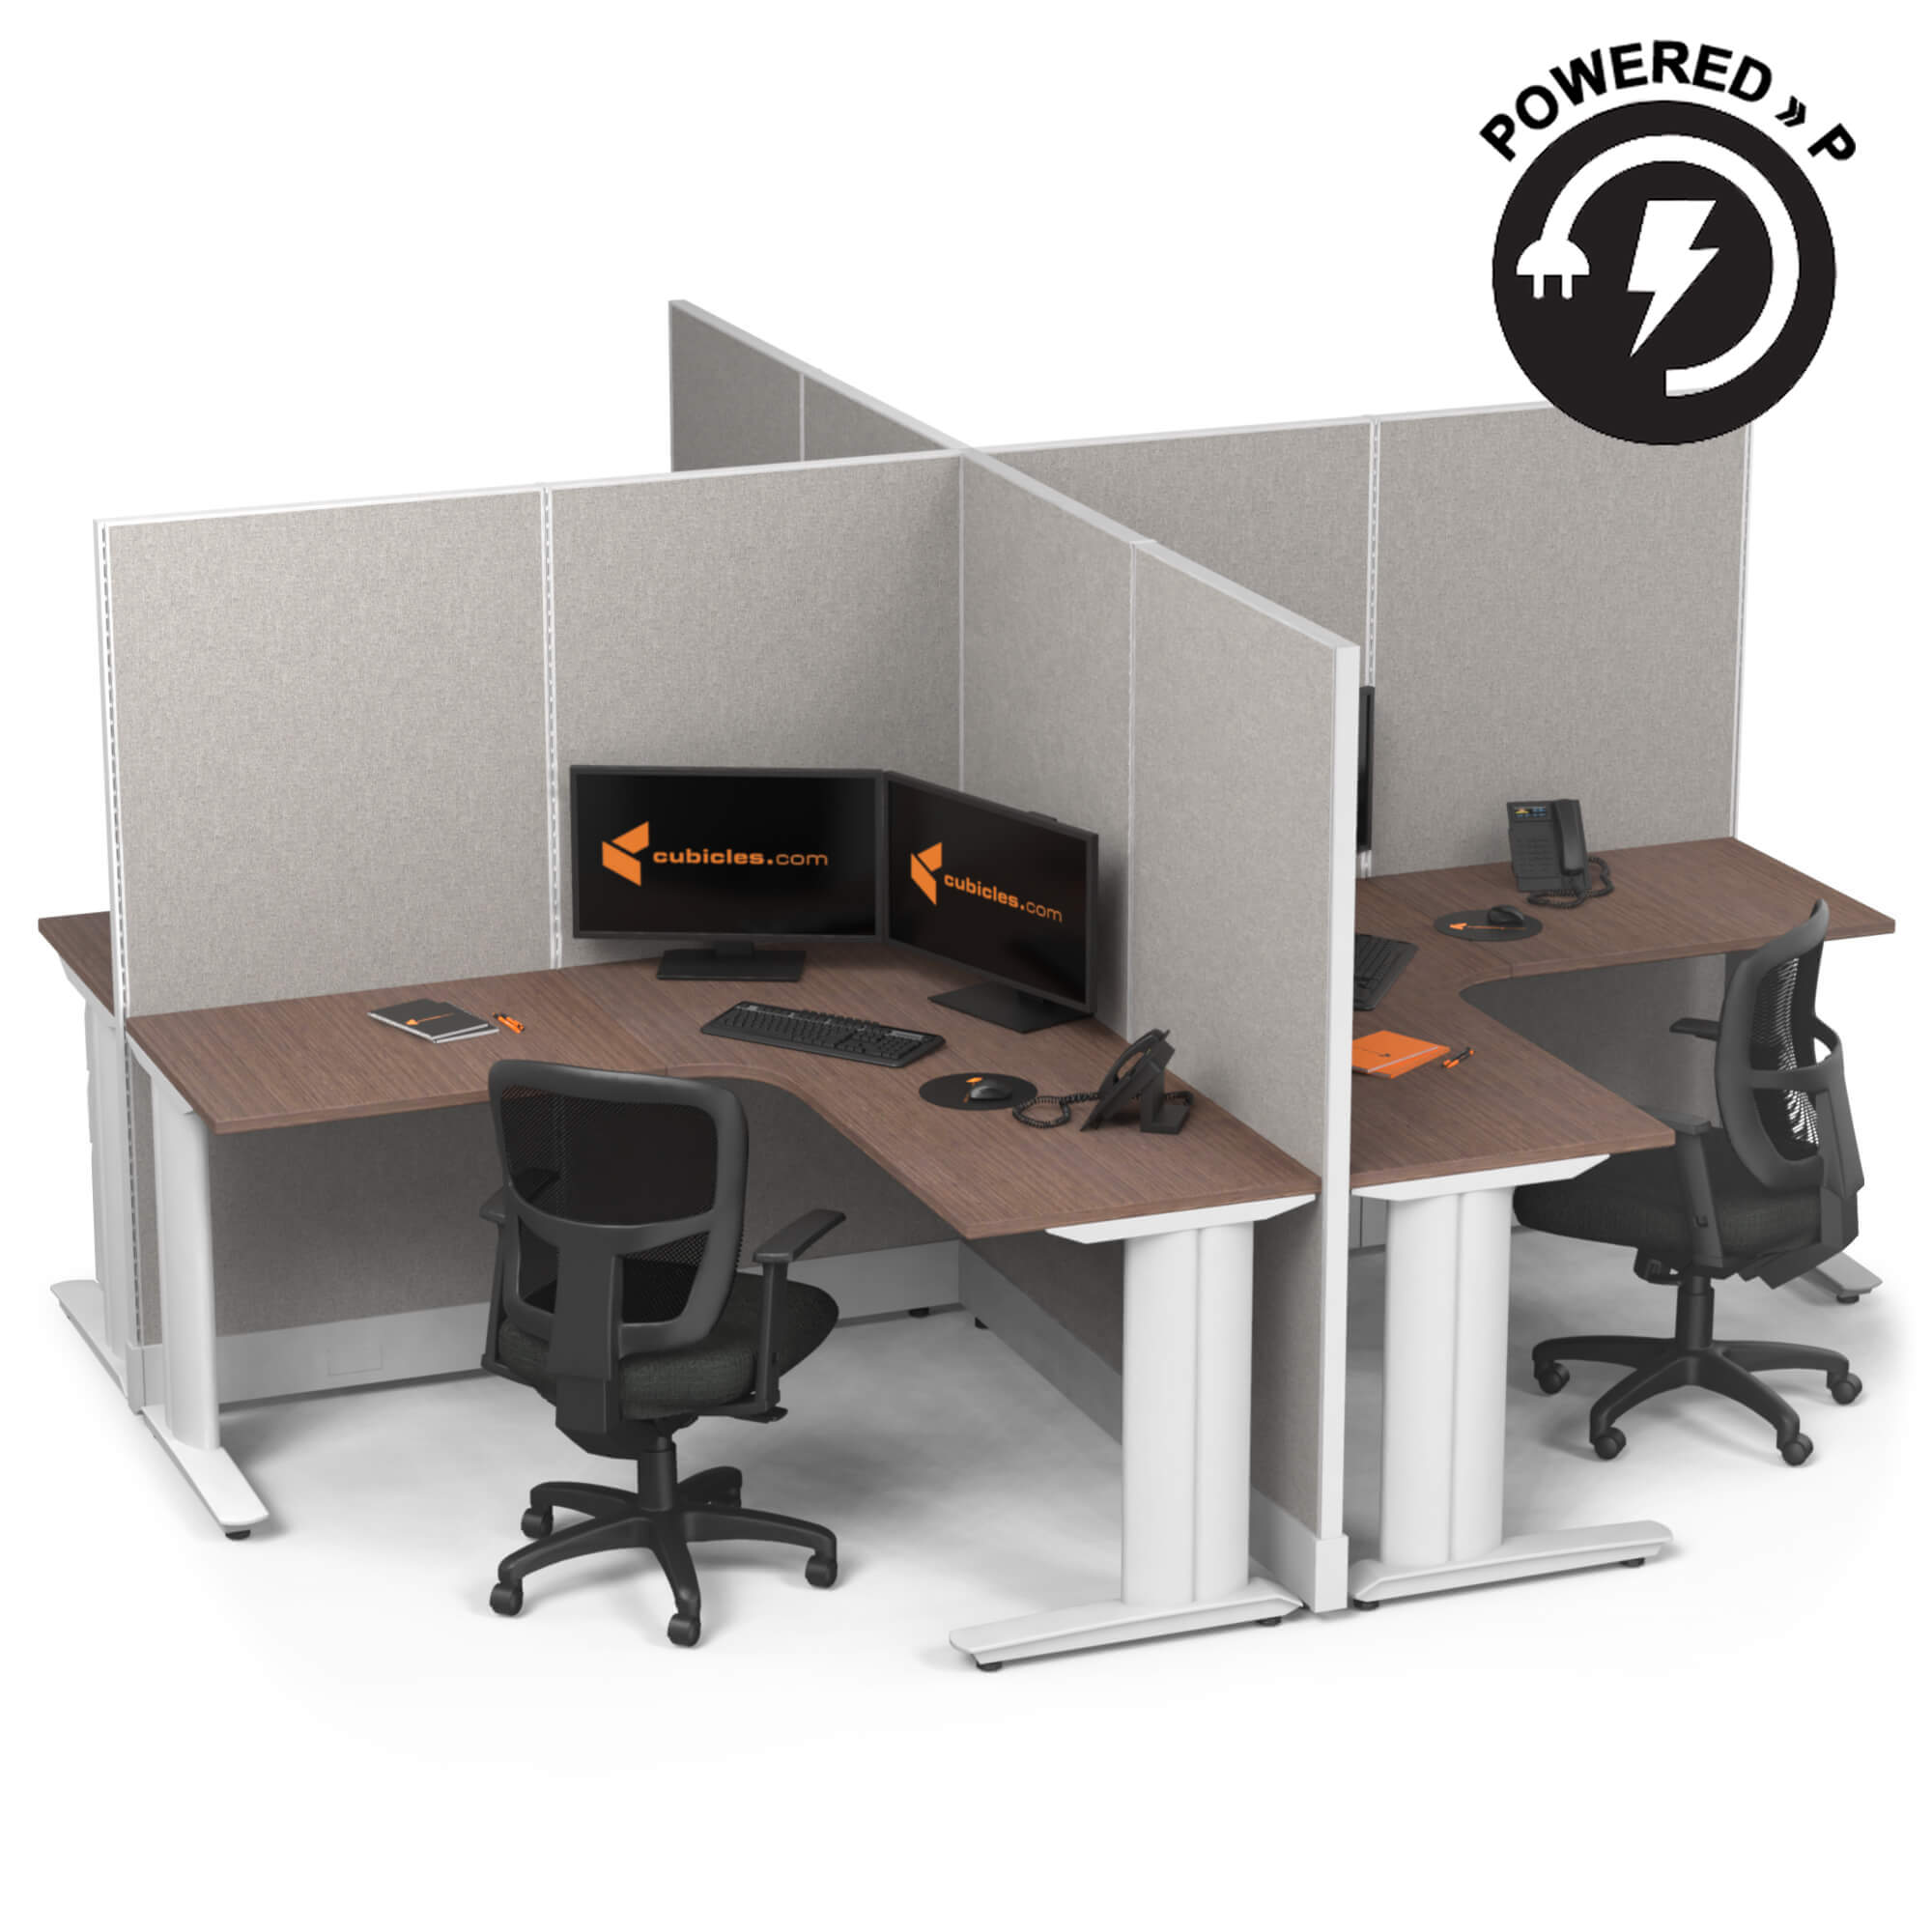 cubicle-desk-l-shaped-4pack-x-cluster-powered.jpg